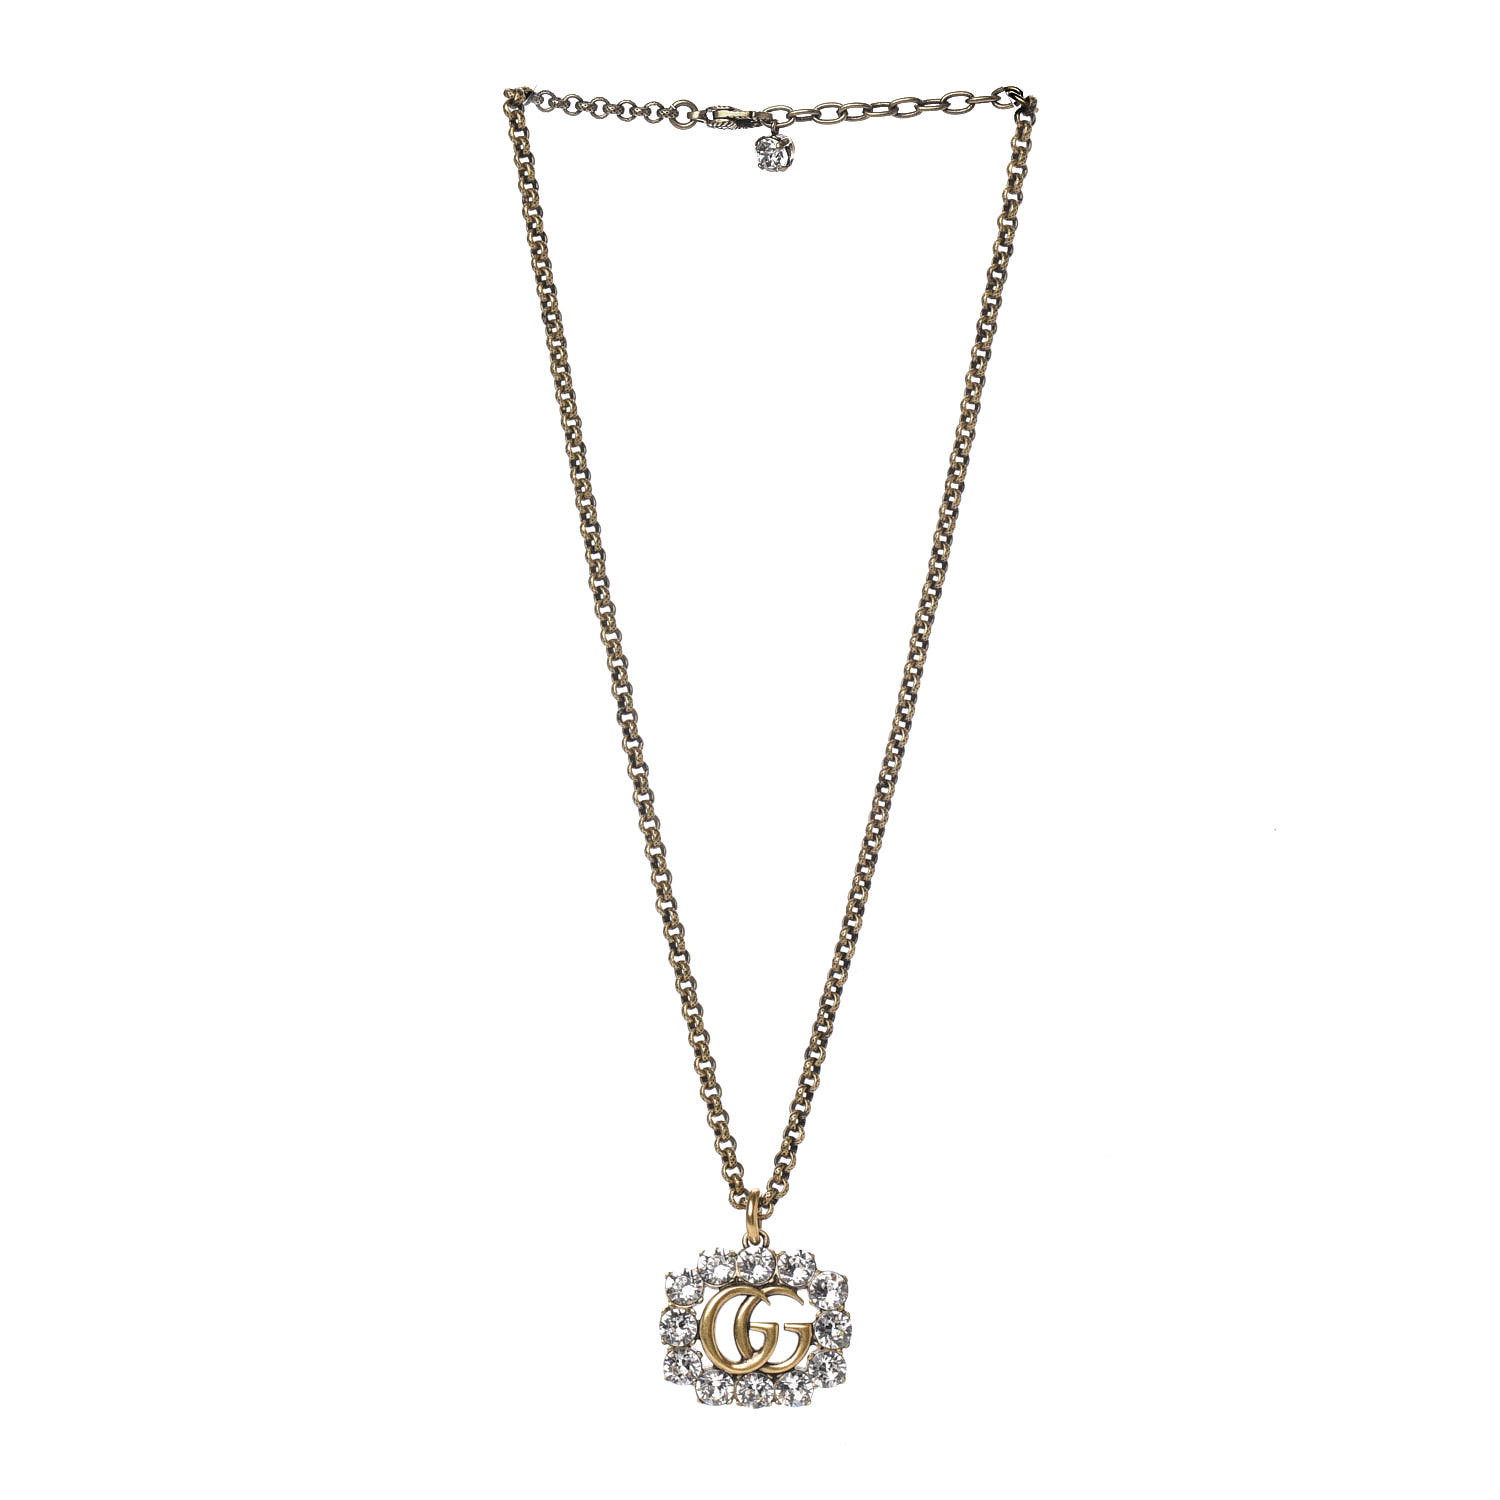 gucci double g necklace gold